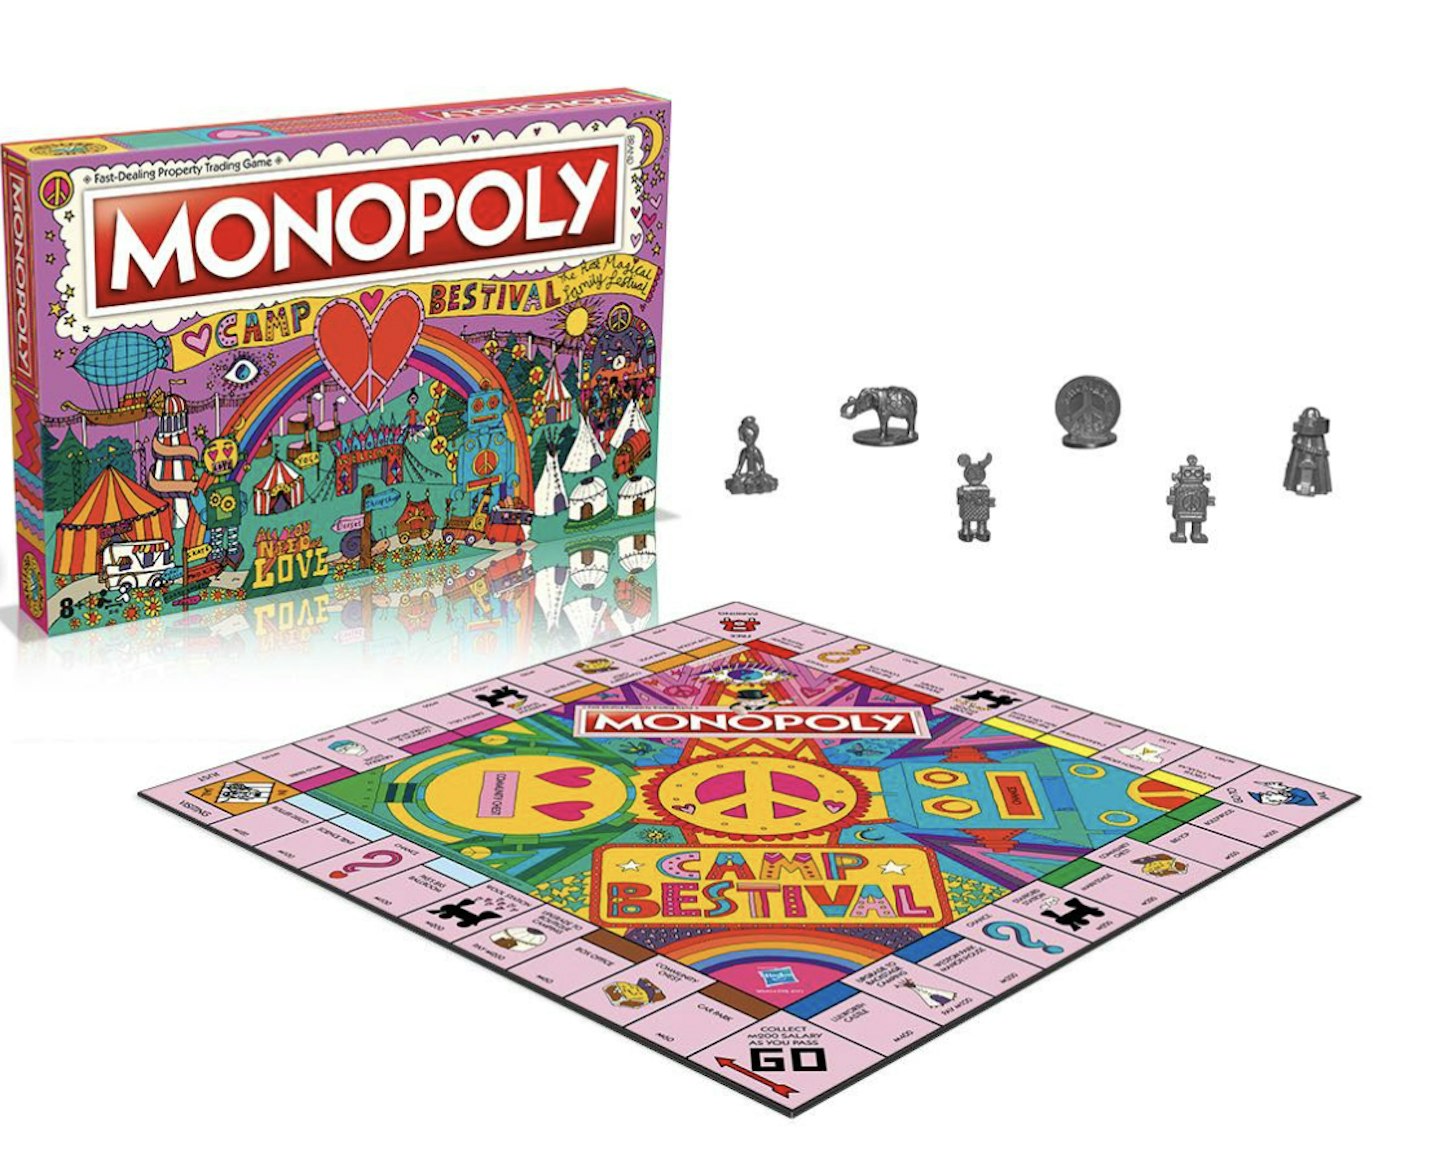 Camp Bestival Monopoly